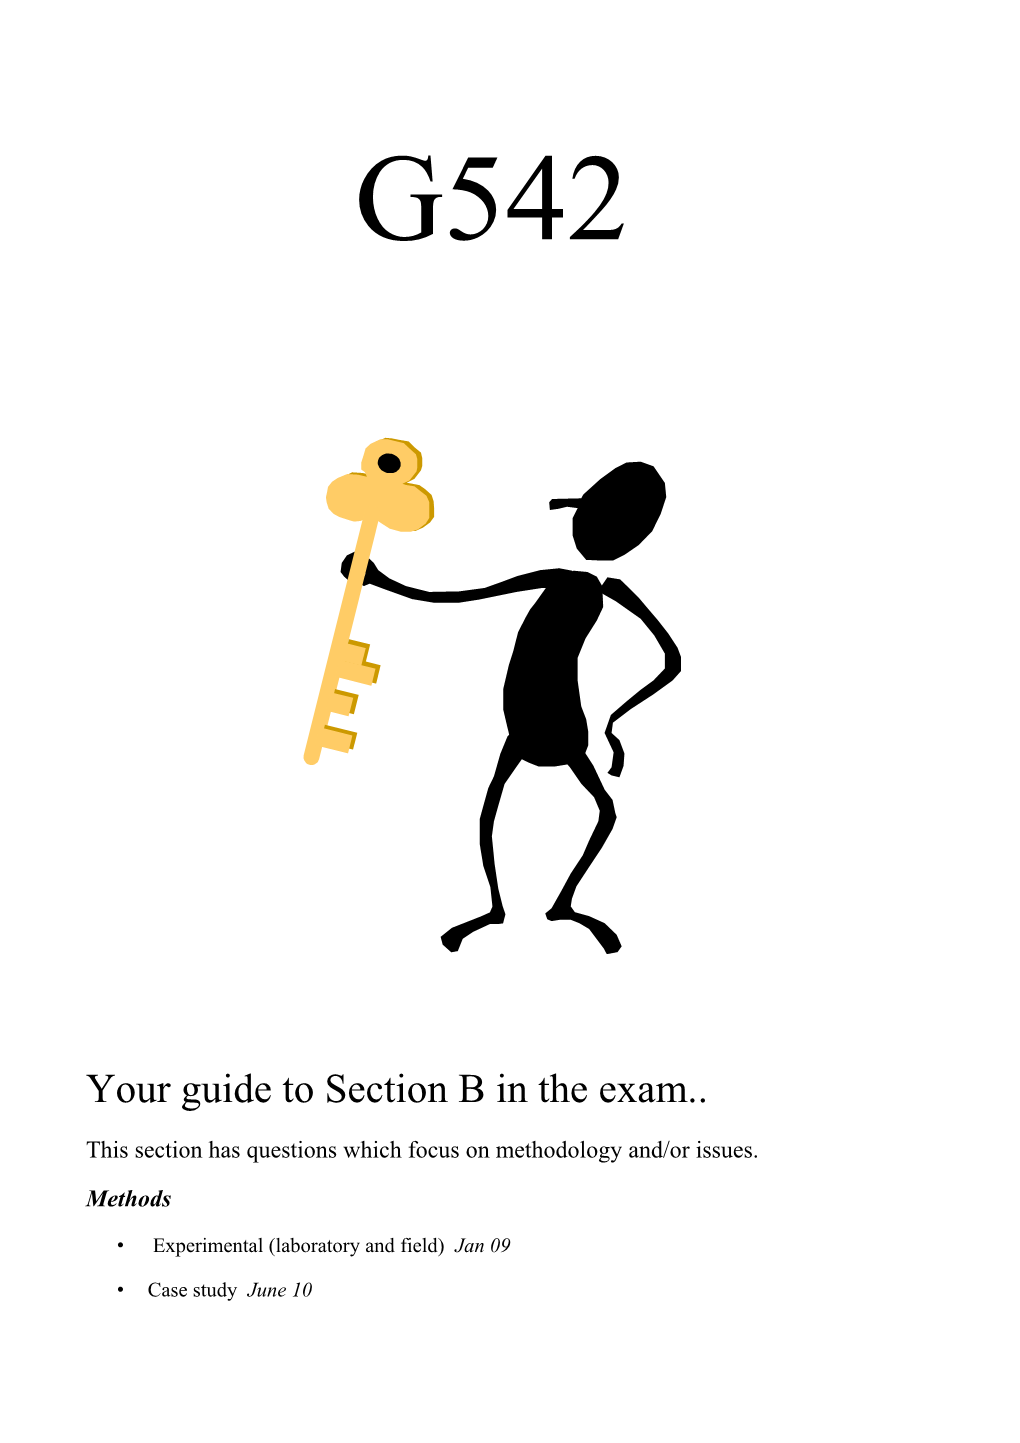 Your Guide to Section B in the Exam